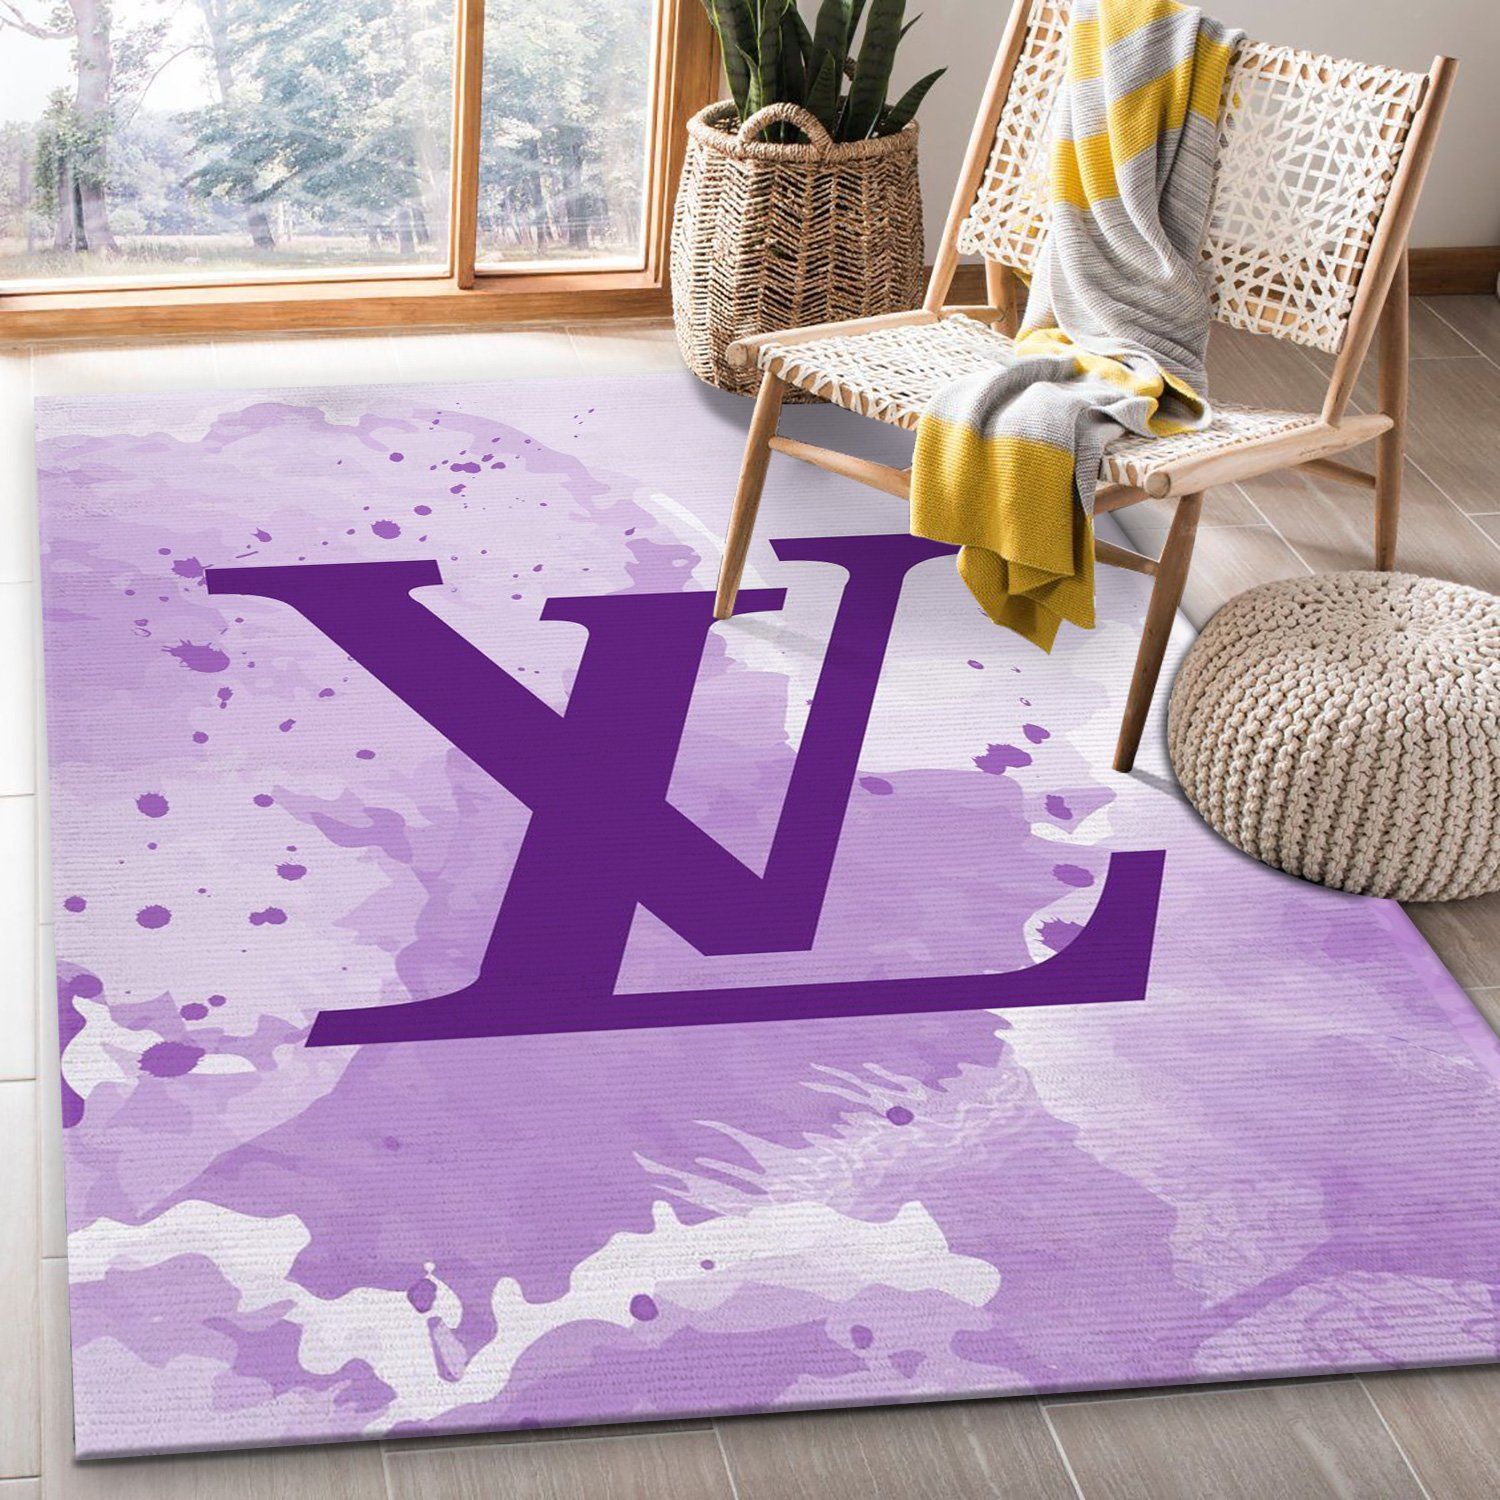 Louis Vuitton Logo Fashion Area Rug Rectangle Living Room Decor Chirstmas  Gift New Version - Infinite Creativity. Spend Less. Smile More